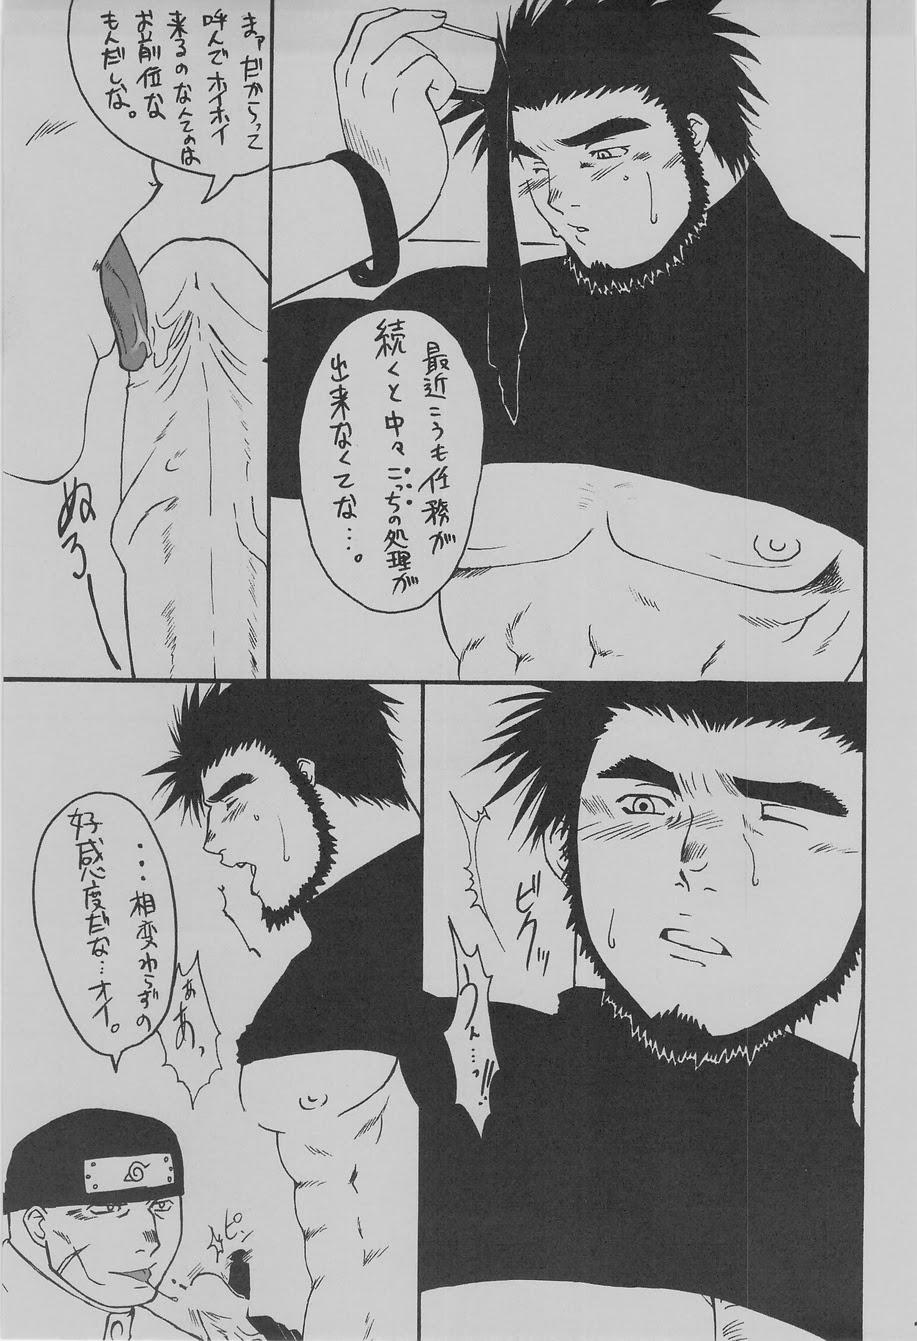 Cut Ka - it happened in the distant past - Naruto Fullmetal alchemist Gunparade march Shemale Sex - Page 13